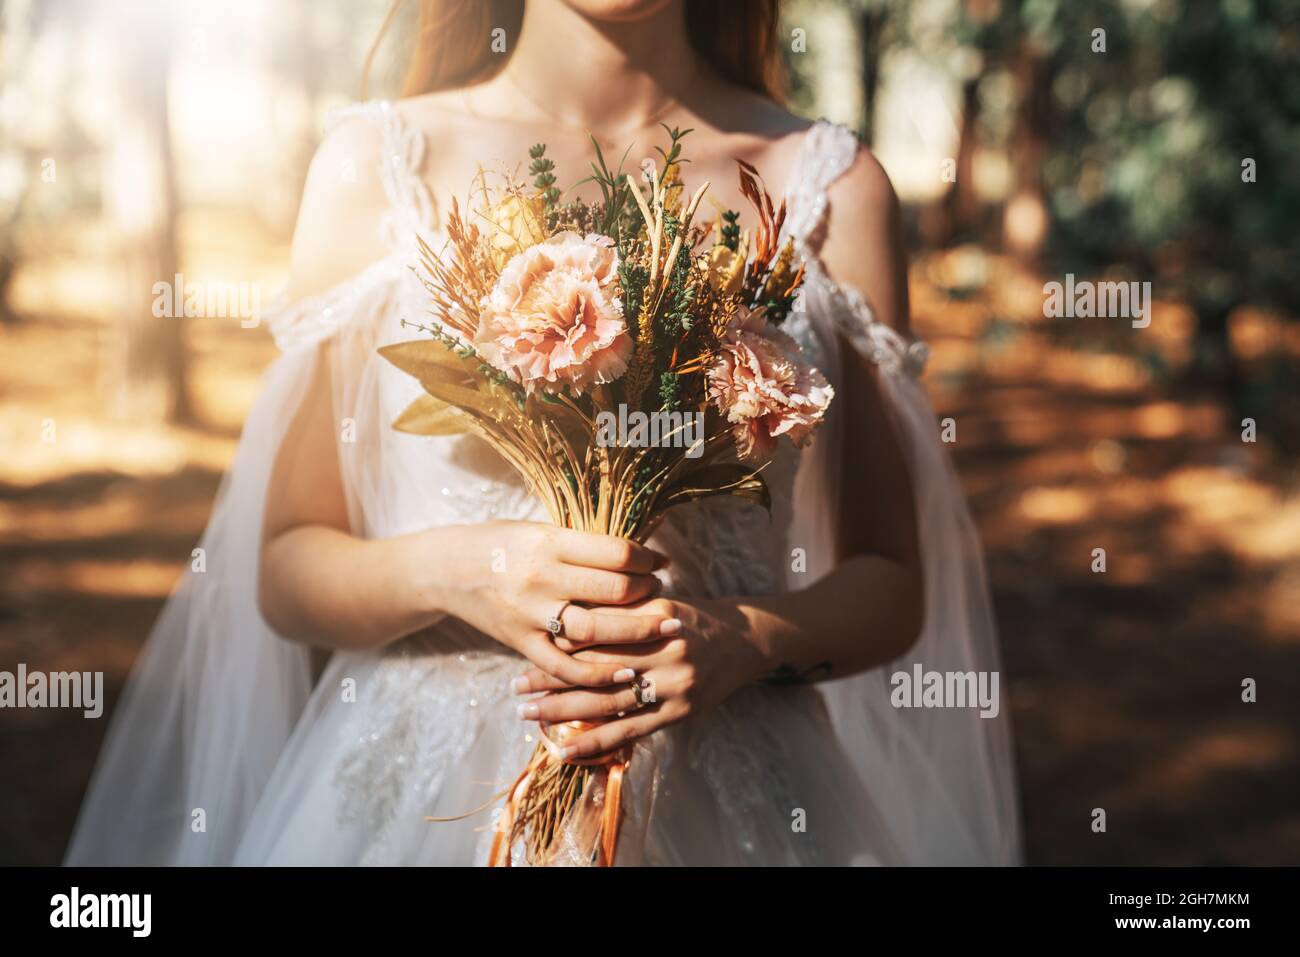 Bride with white wedding dress in forest holding colorful and dried wedding bouquet. . High quality photo Stock Photo